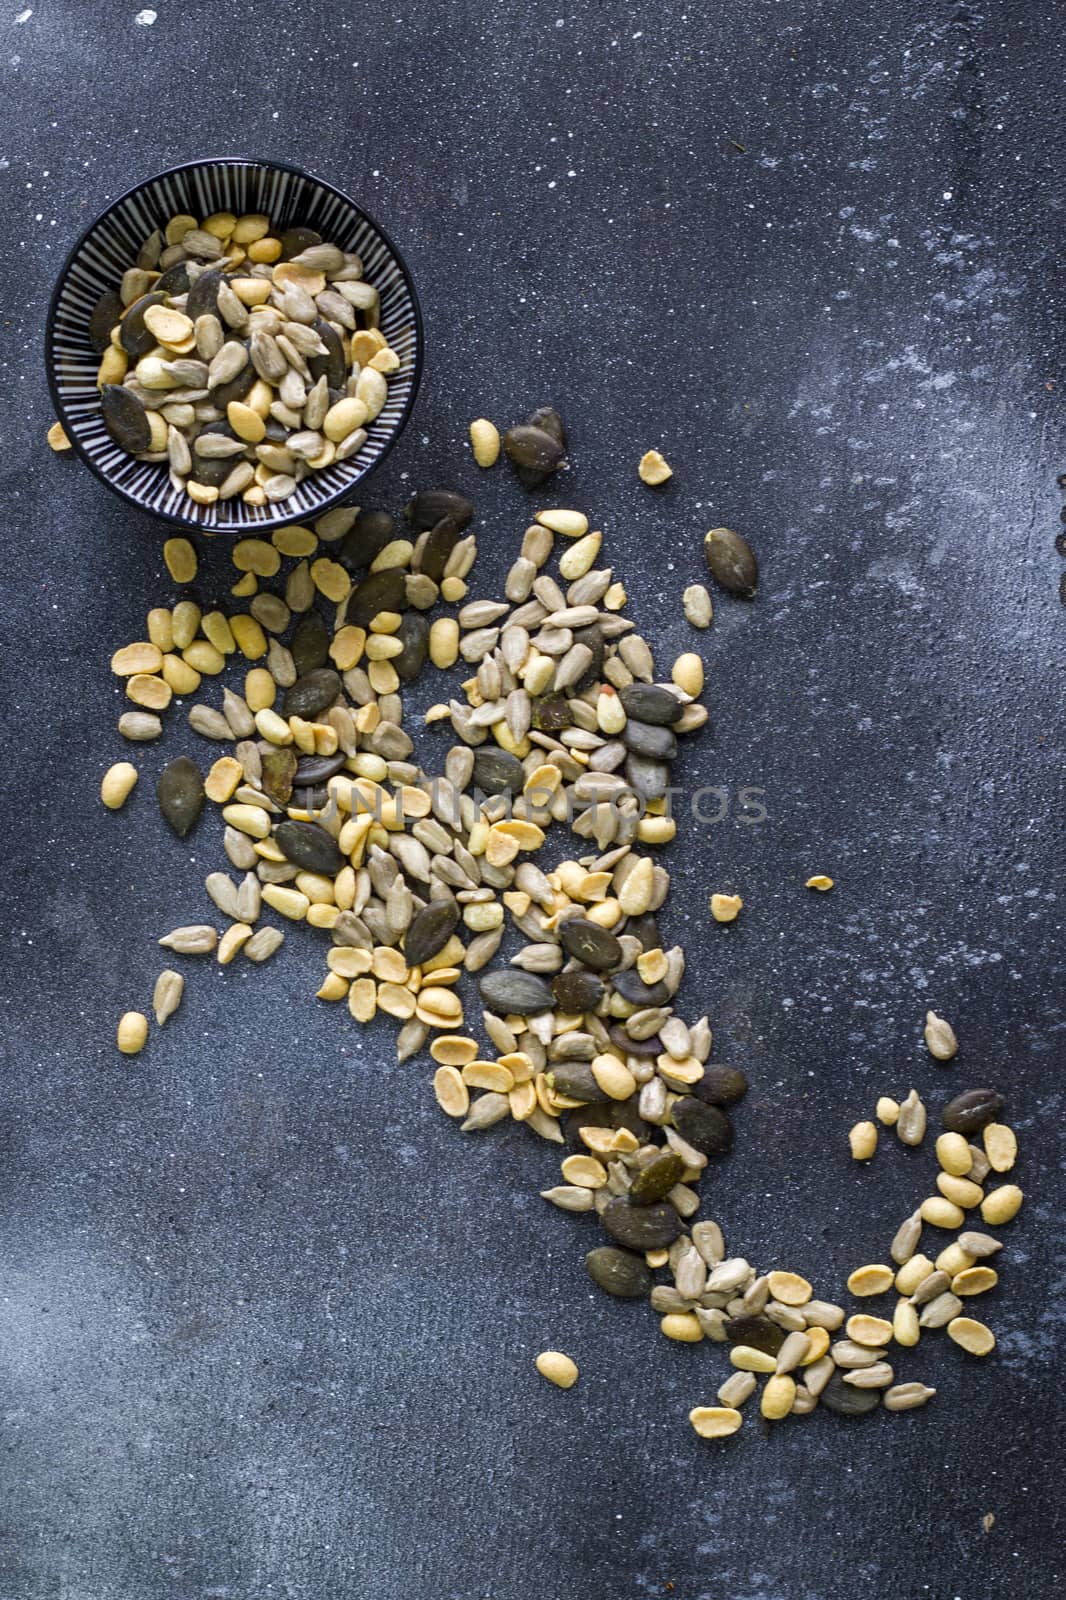 Sunflower and pumpkin seeds in bowl on the blue background. Large group of seeds. Snack and appetizer.